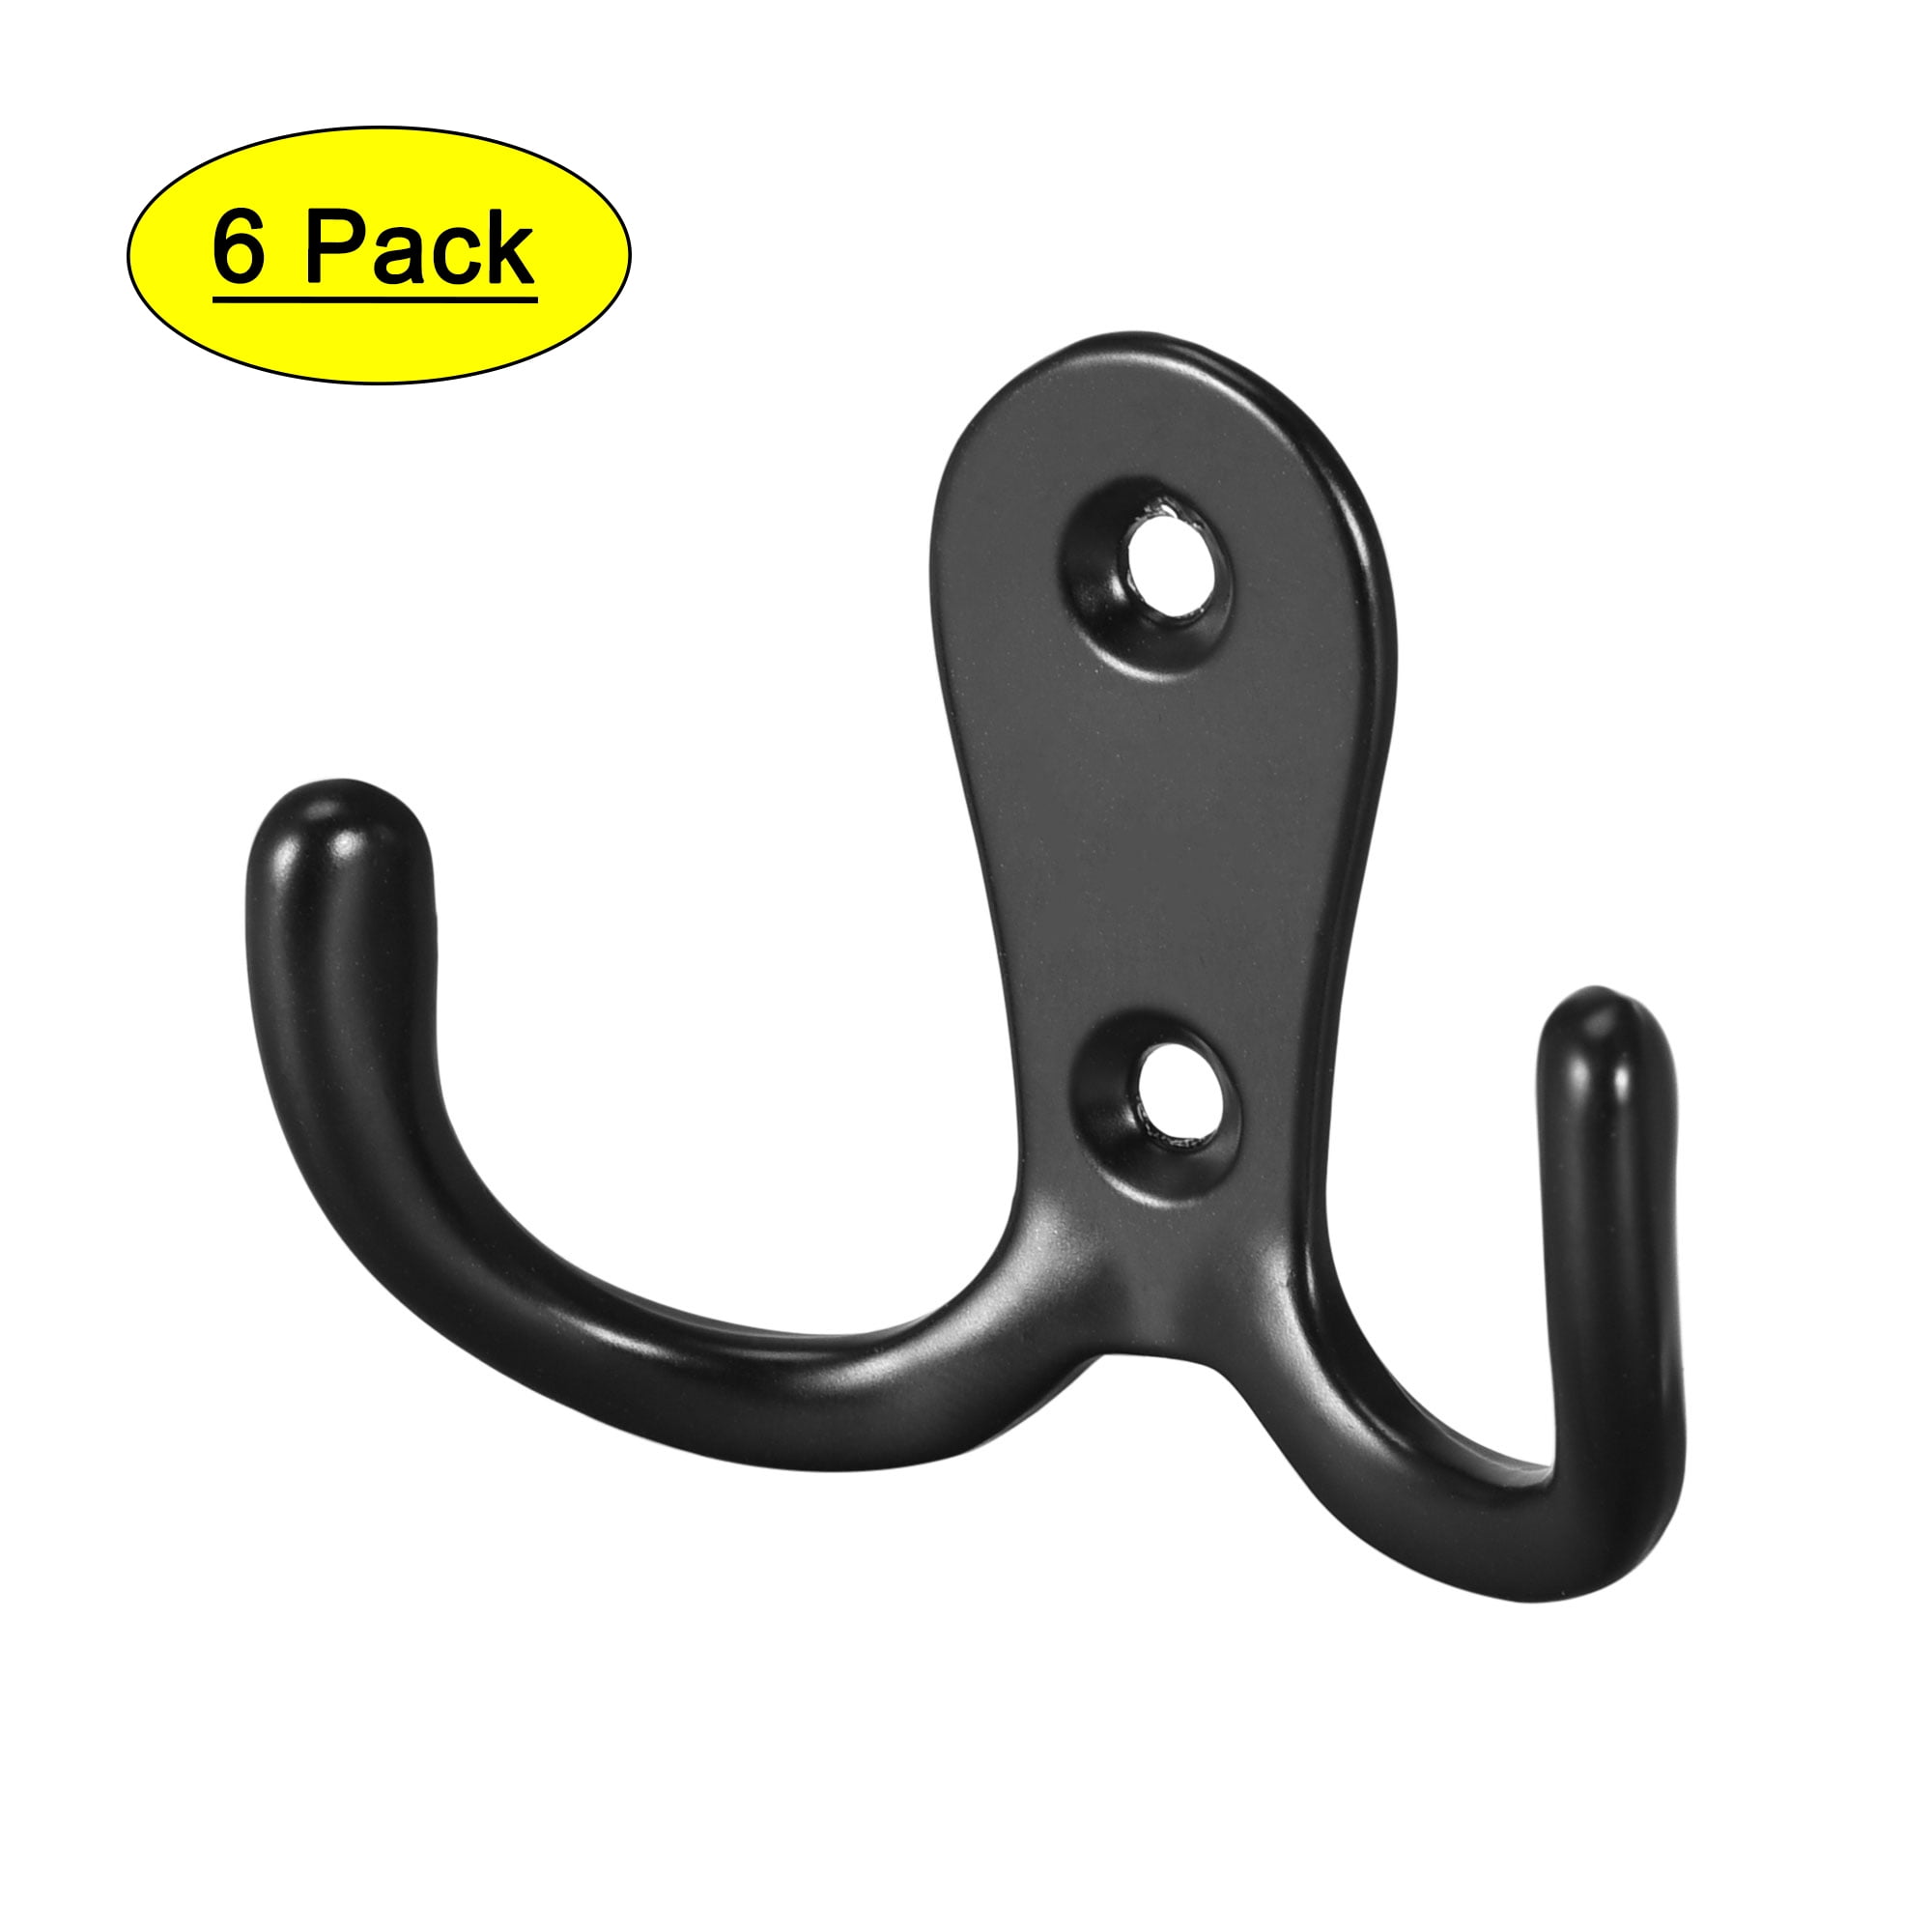 Collapsible Snake Hook,iClover Retractable Stainless Steel Snake Hook  Adjustable Telescoping Portable Reptile Tool (from 11.4 to 39.3) Handle  Corn Snakes Kingsnakes and Other Small Snakes 